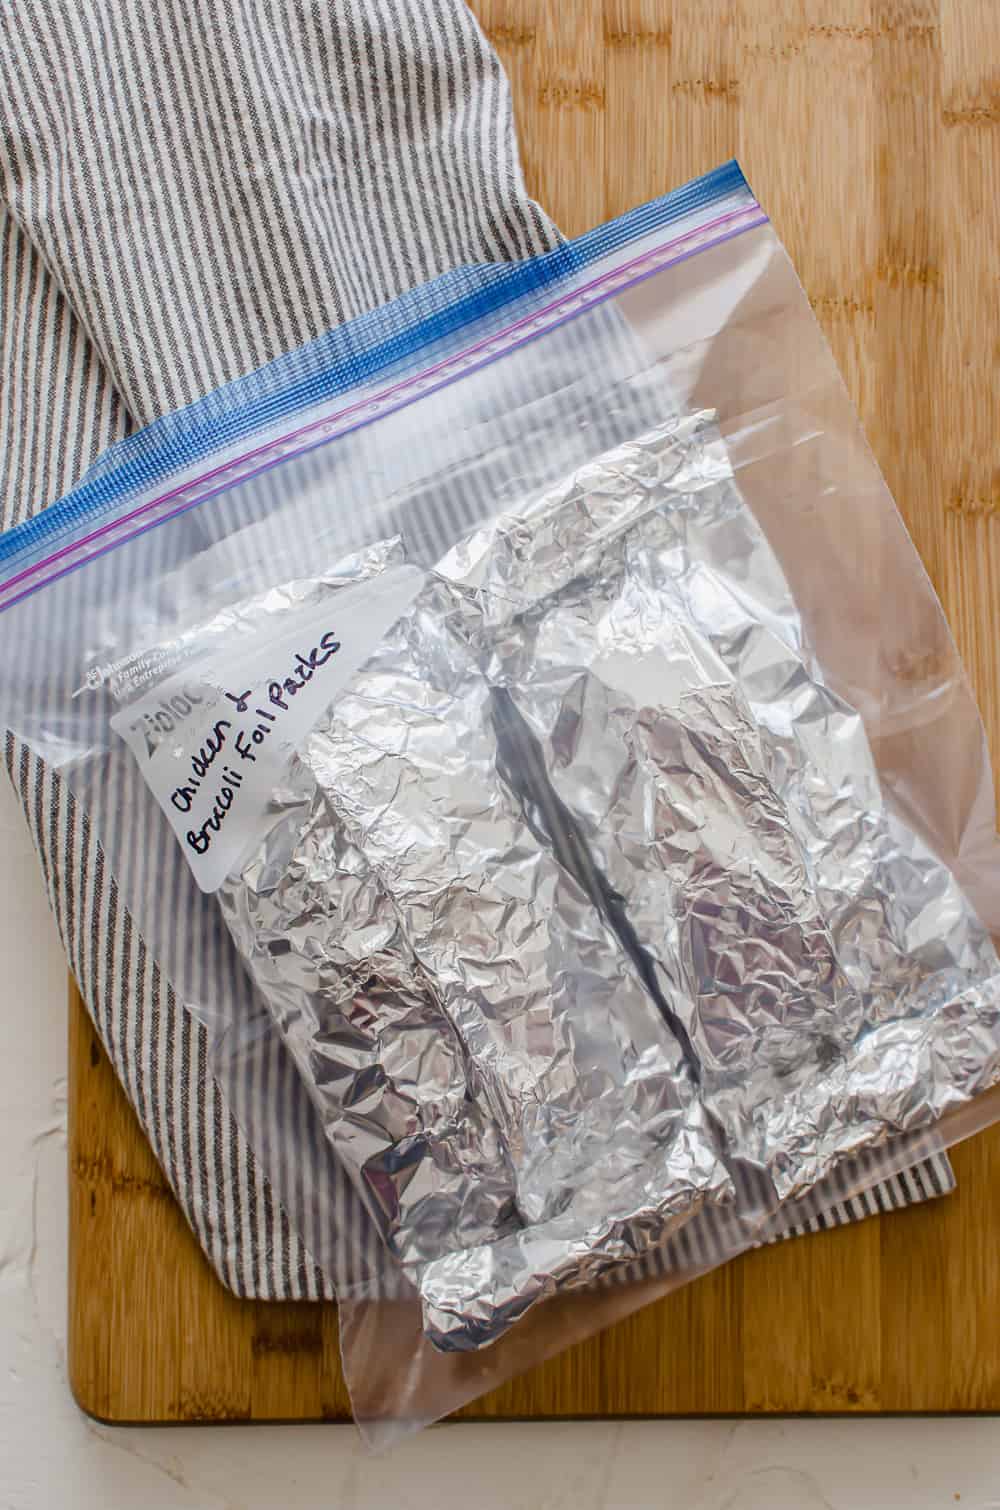 Chicken, broccoli foil packets in a freezer bag.